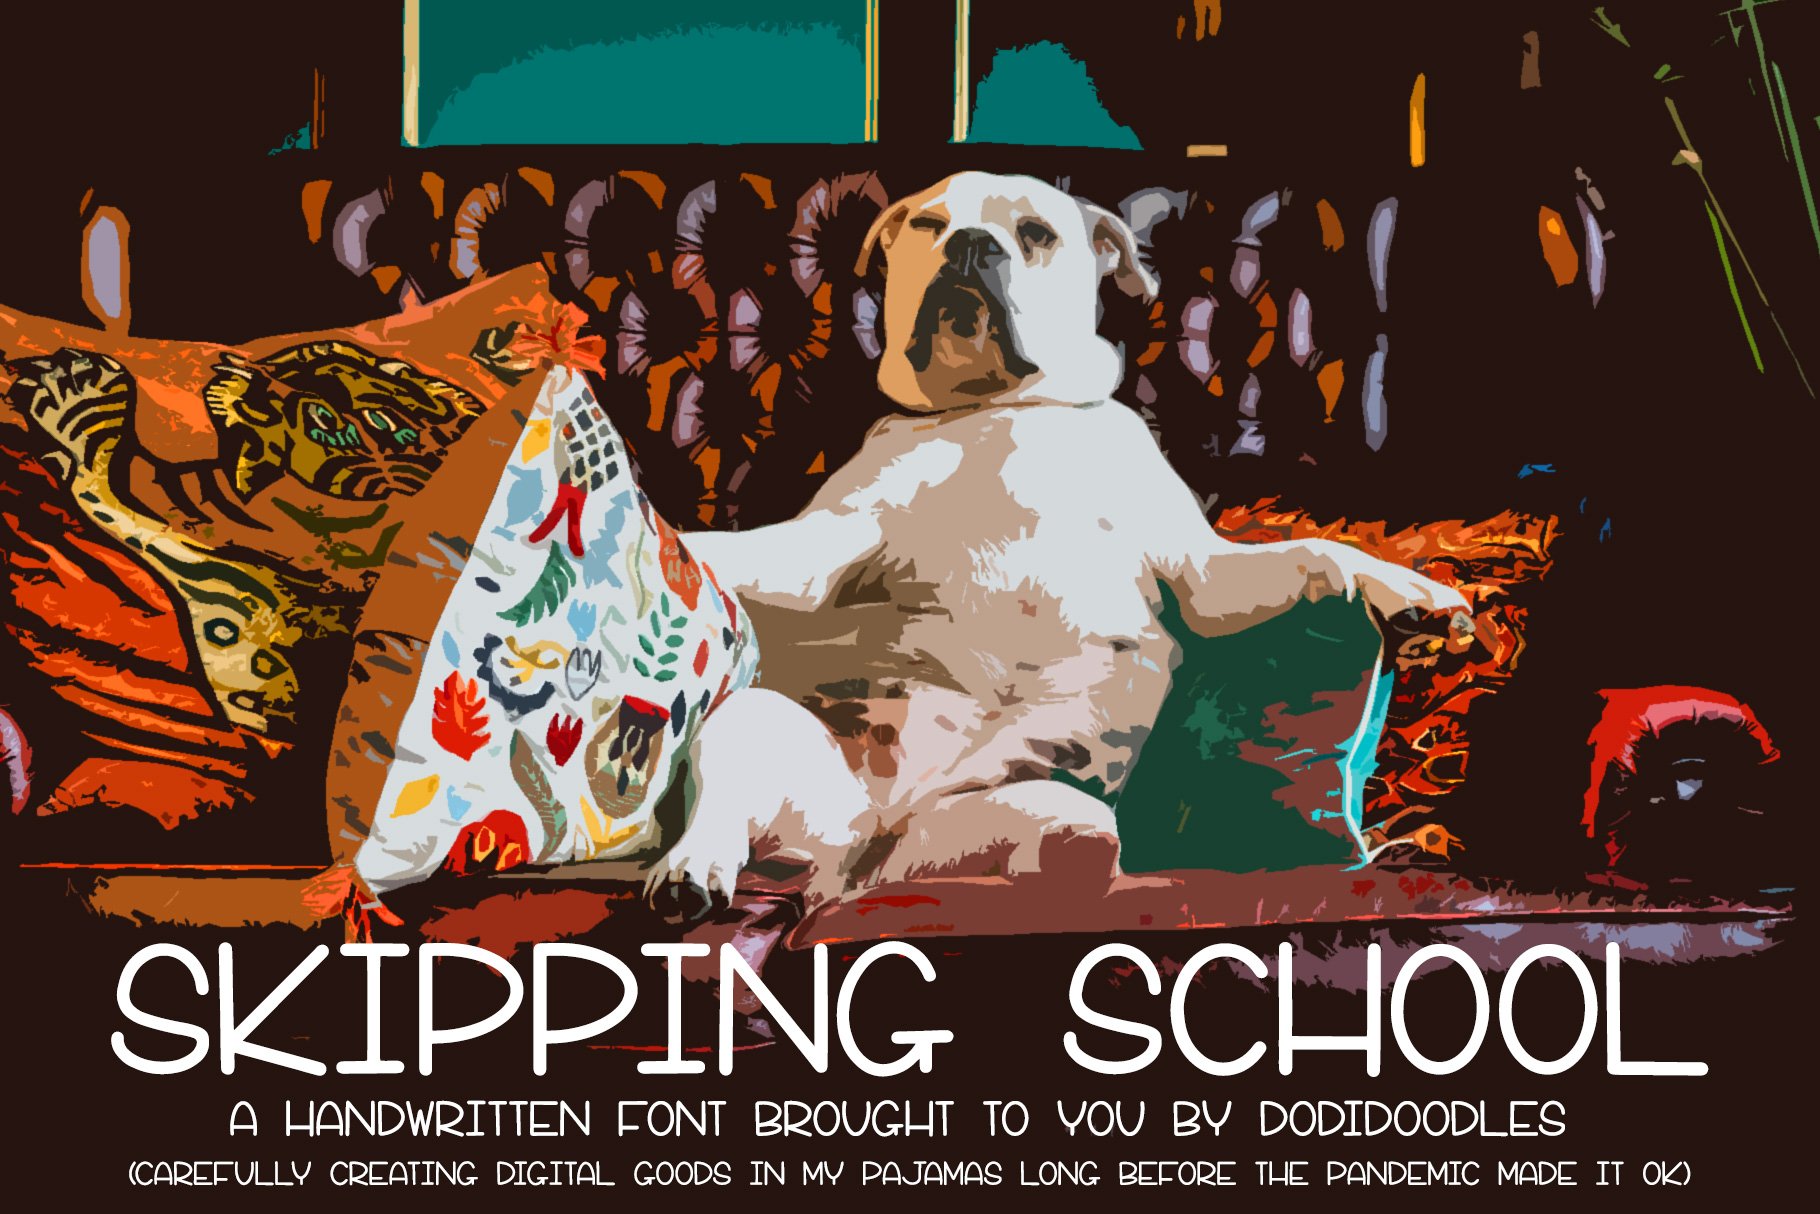 Sale Skipping School Font cover image.